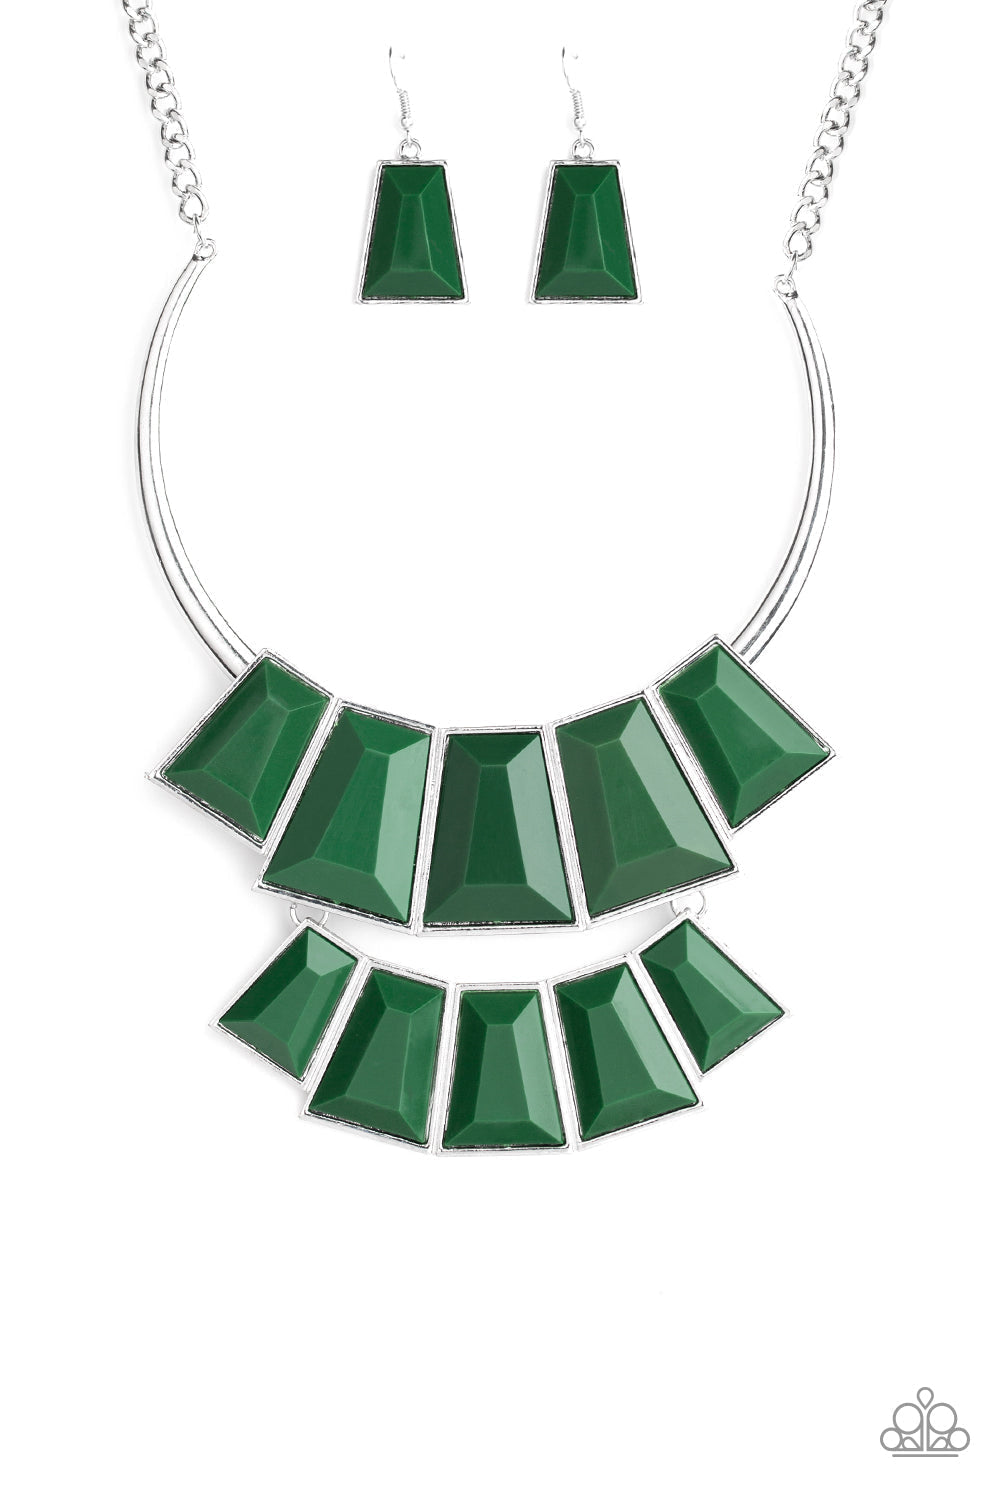 Lions, TIGRESS, and Bears - Green - Silver Necklace - Paparazzi Accessories - Tinted in the lush green hue of Eden, rows of faceted emerald-shaped beads link into colorful beaded plates. The uppermost frame slides along a bowing silver bar, adding playful movement to this fierce statement-making piece. Features an adjustable clasp closure.  Sold as one individual necklace. Bejeweled Accessories By Kristie